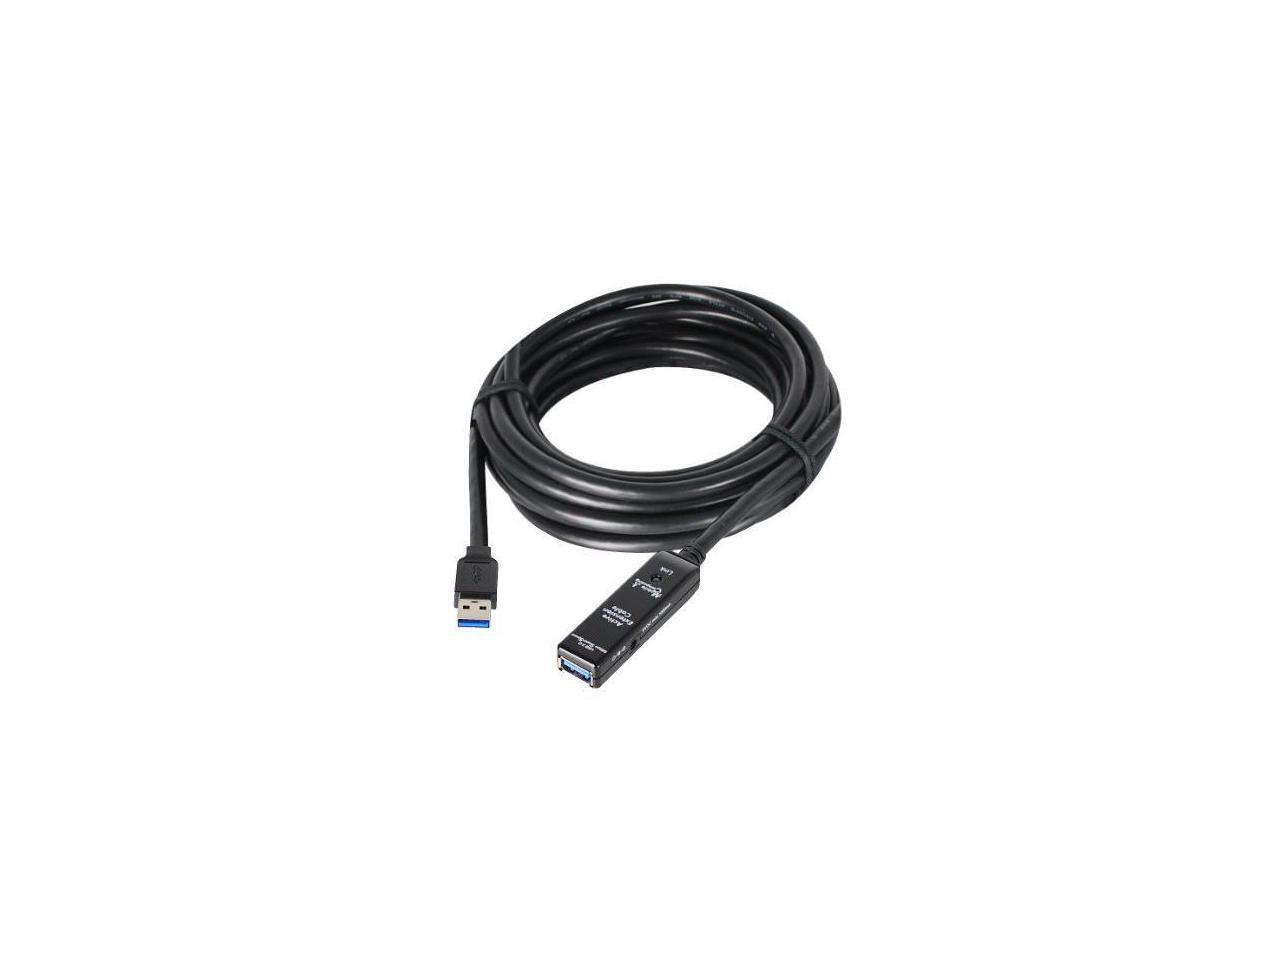 SIIG JU-CB0811-S1 Black USB 3.0 Active Repeater Cable w/ Power adapter